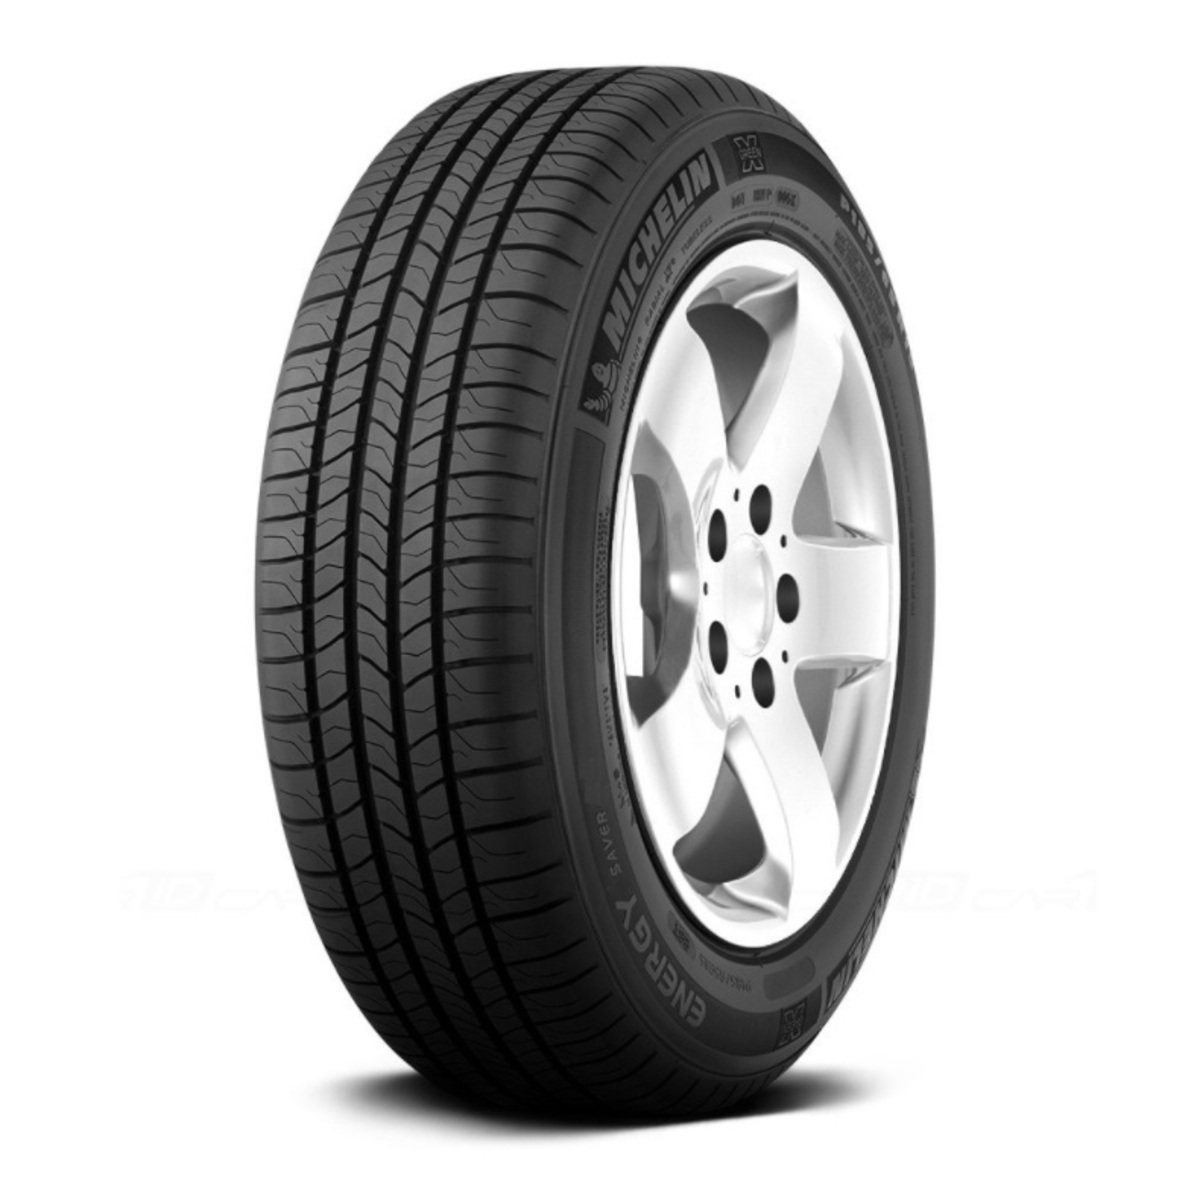 Michelin Energy Saver - Reviews Tyre Tests and